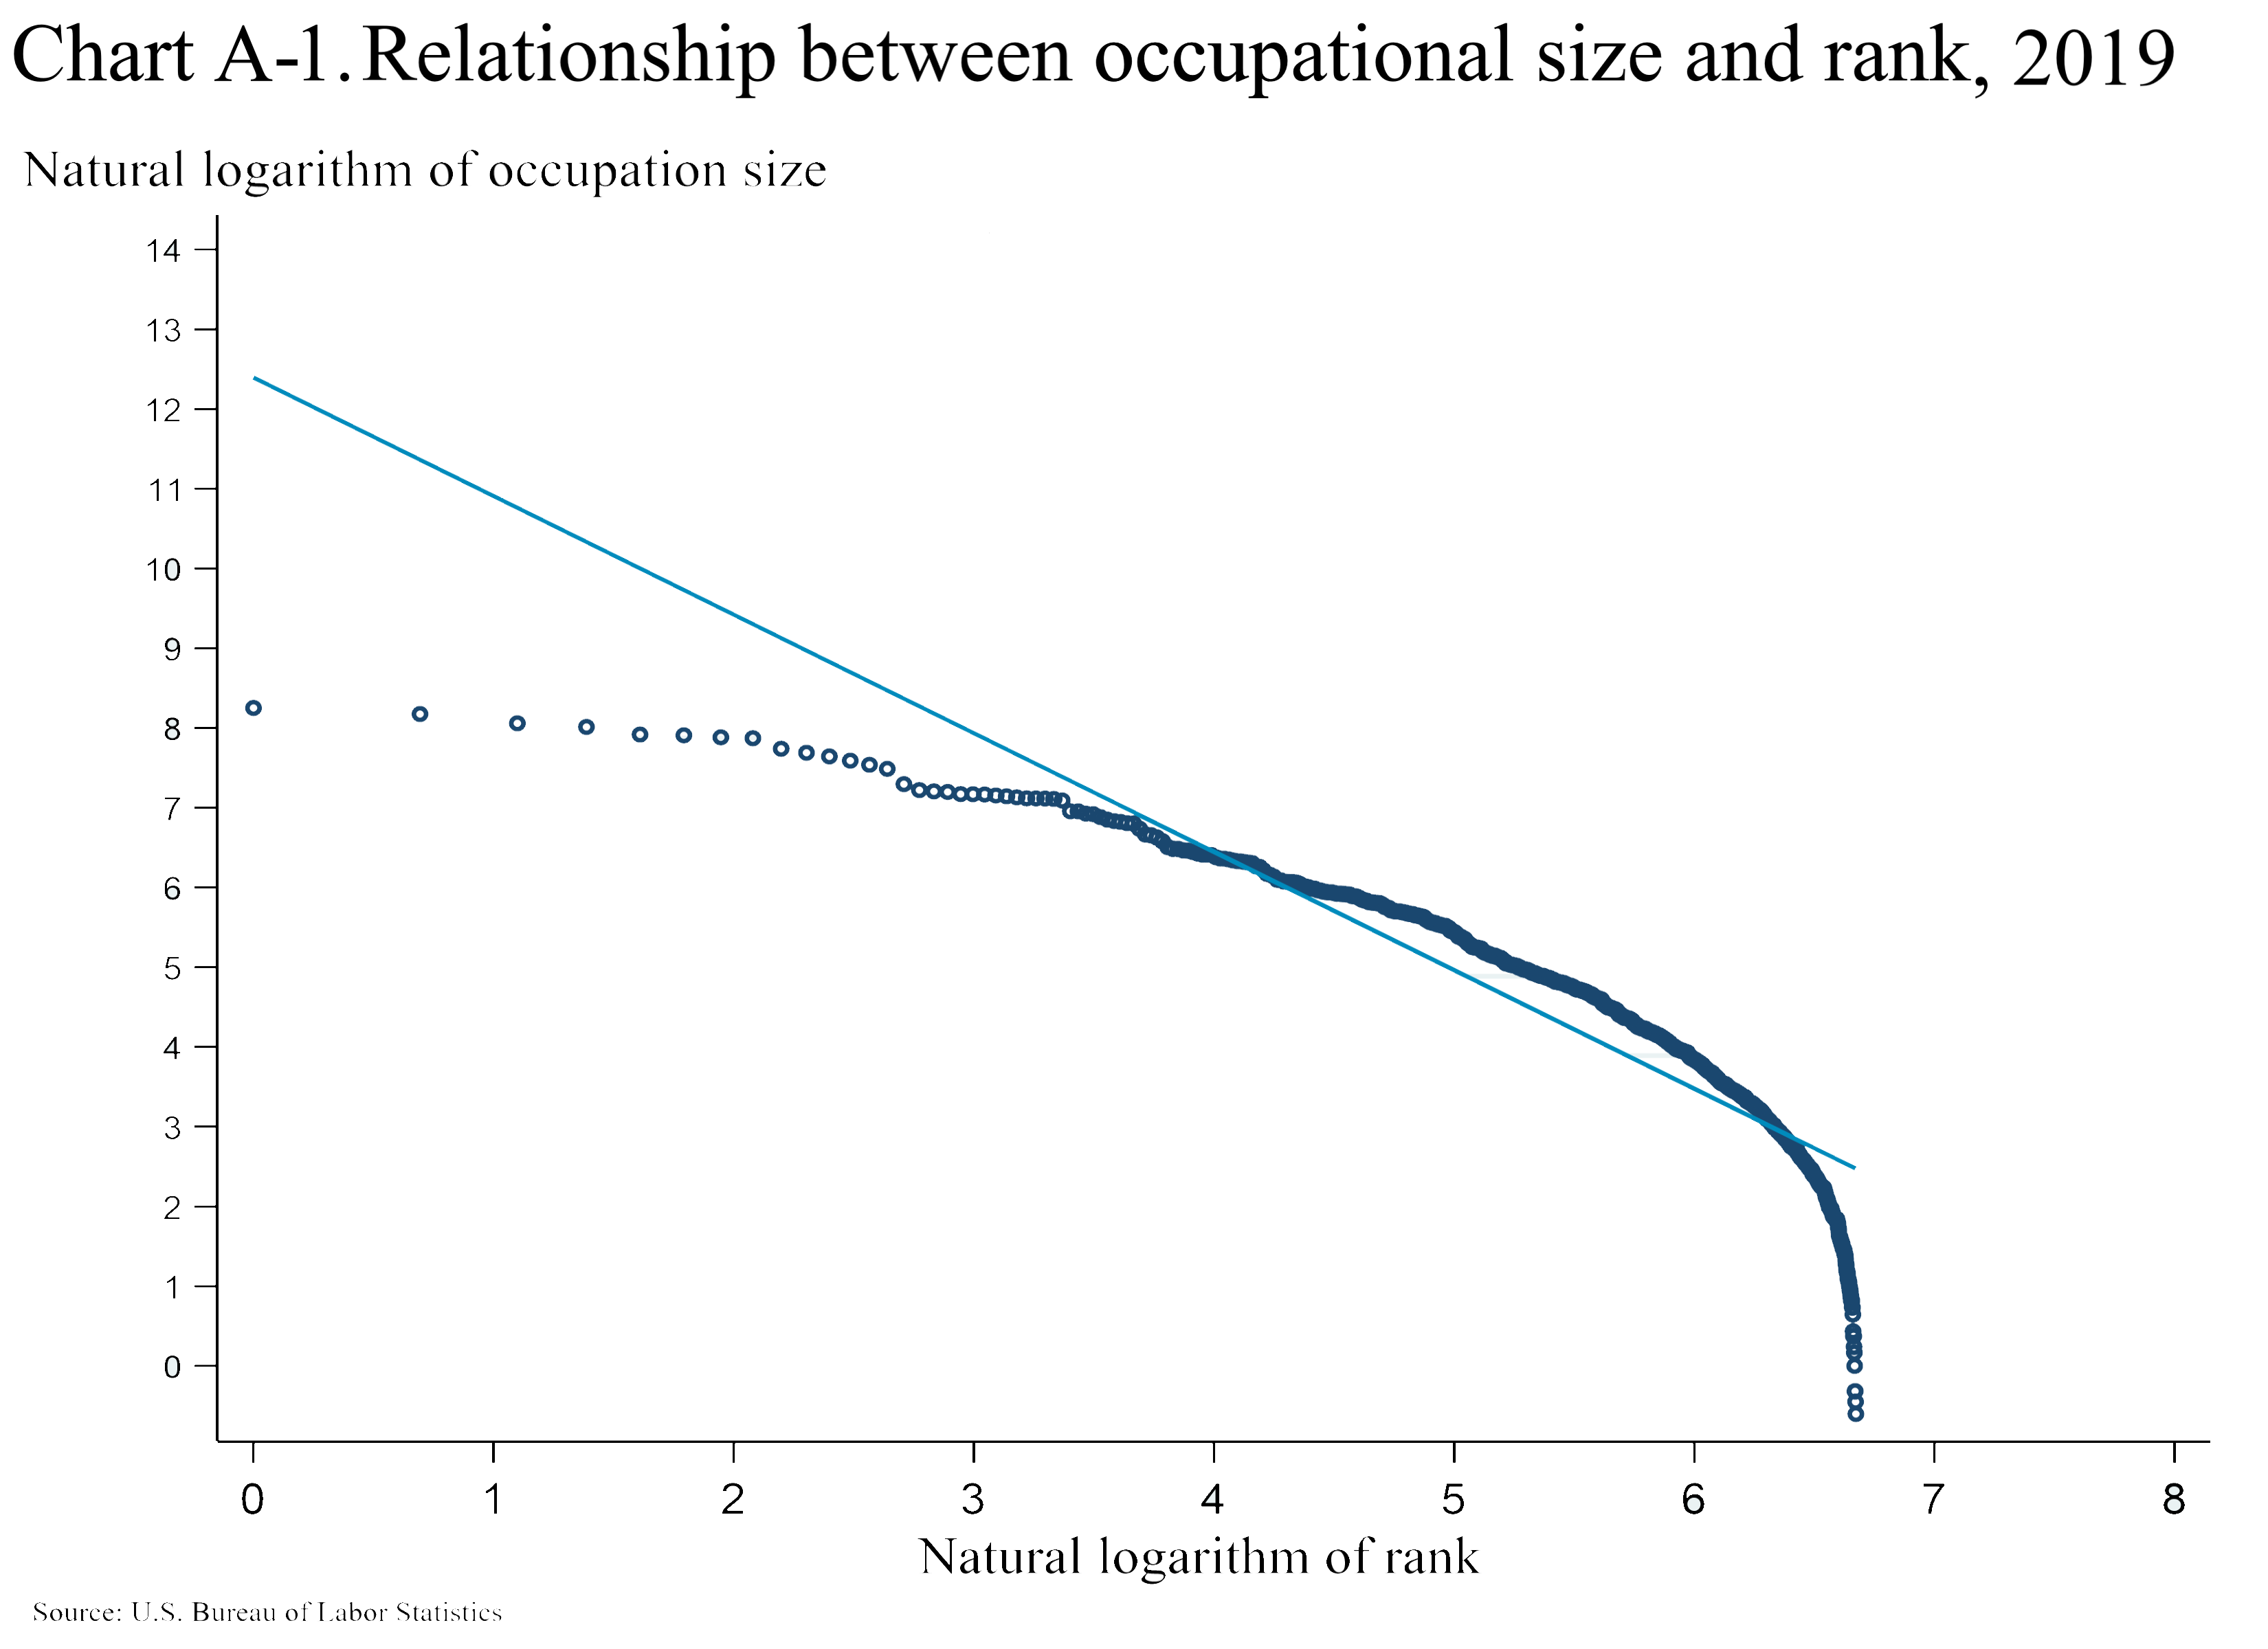 Chart A-1. The relationship between occupational size and rank. A linear fit is poor.